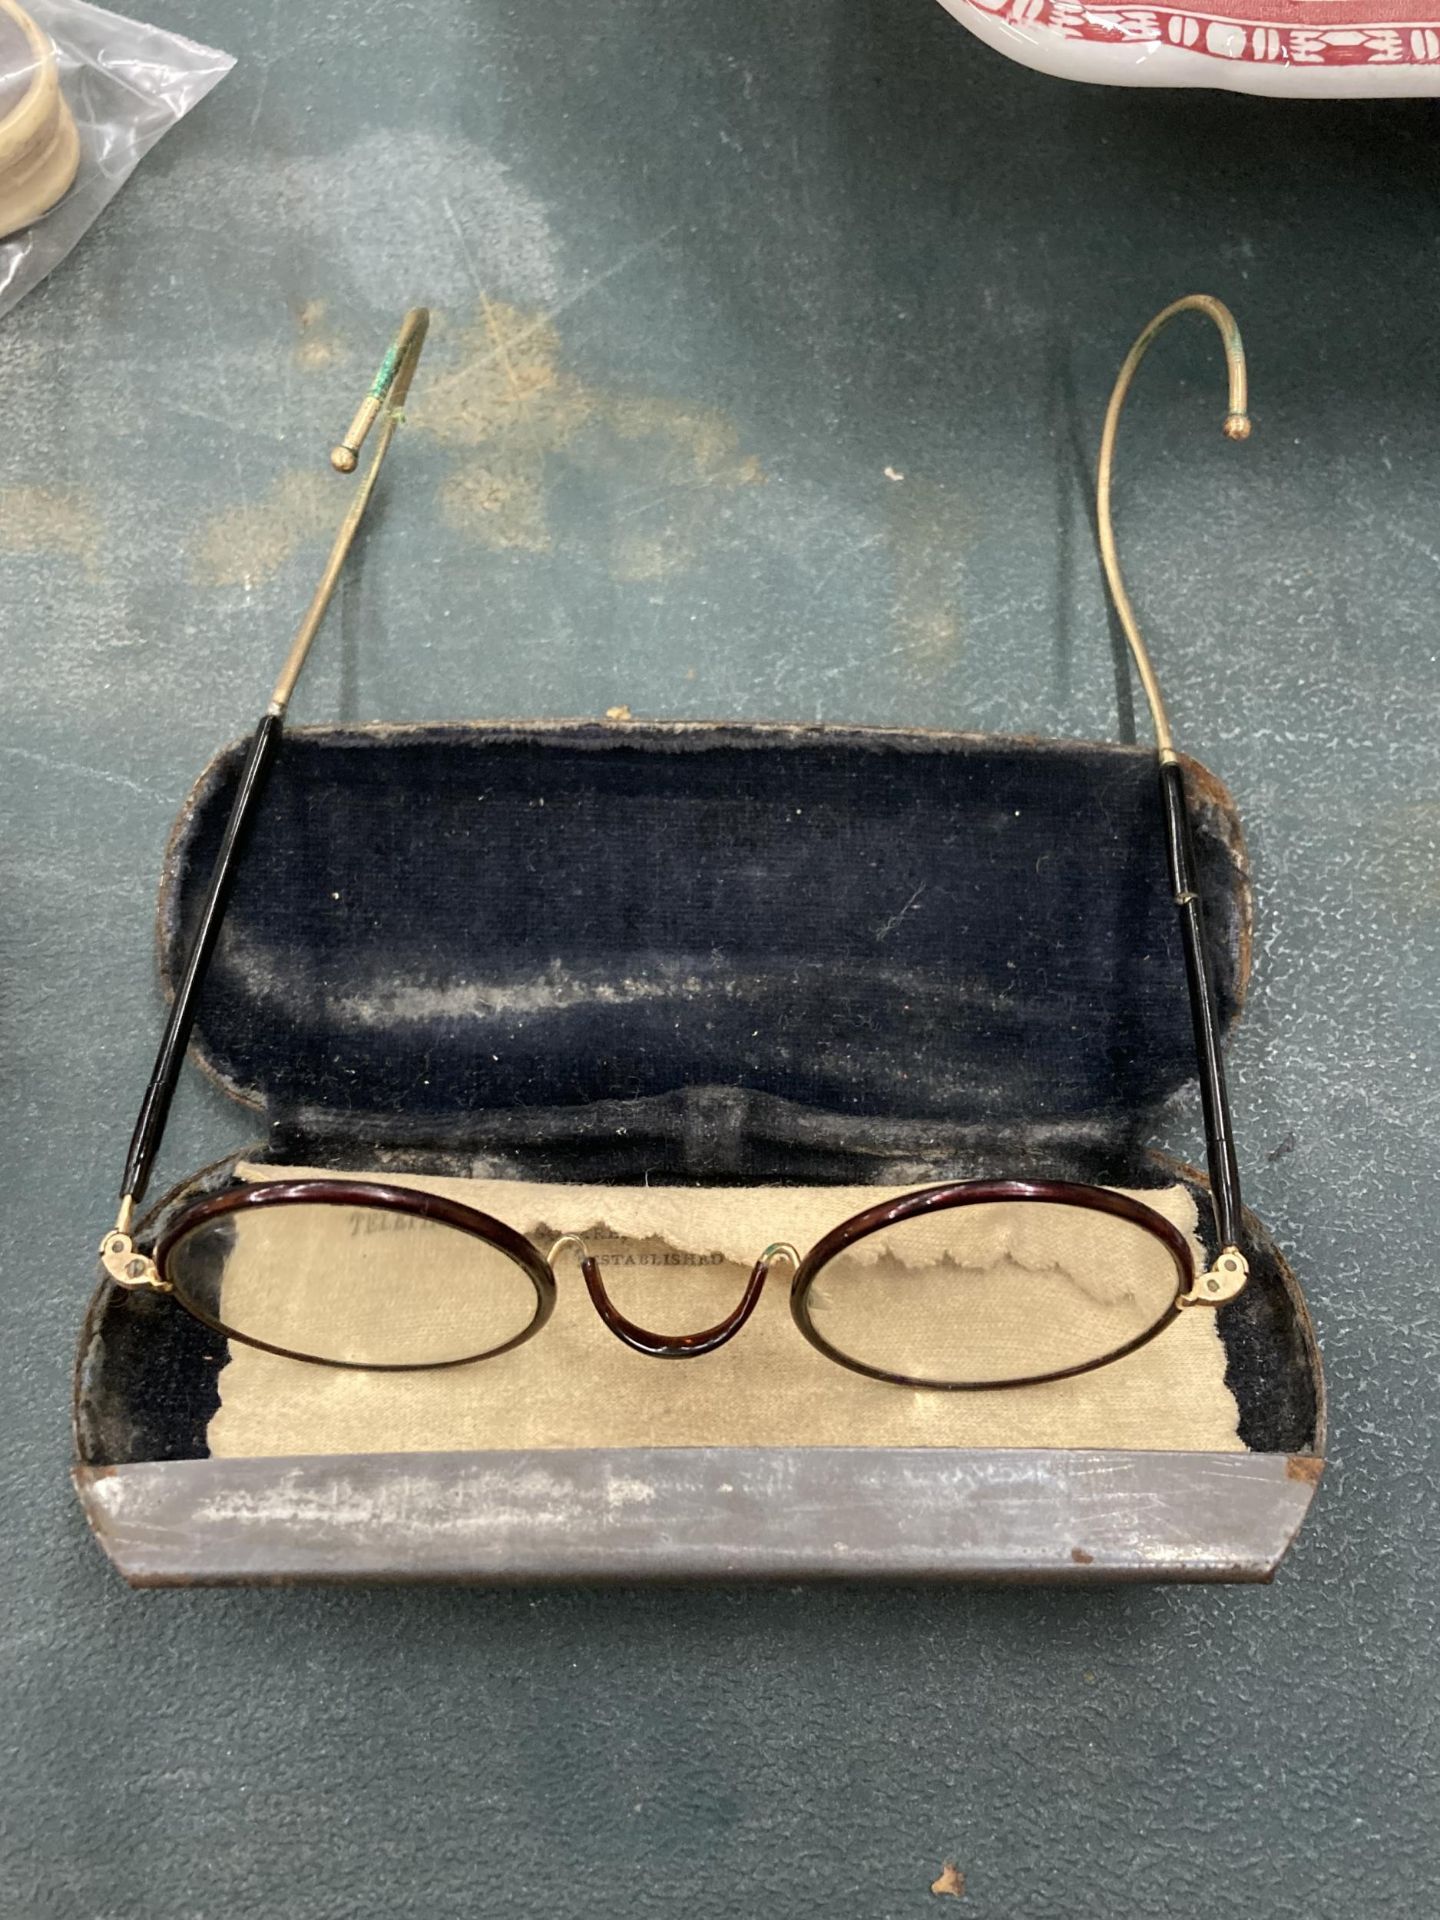 A PAIR OF VICTORIAN TORTOISE SHELL GLASSES IN A WHITE METAL CASE - Image 2 of 3